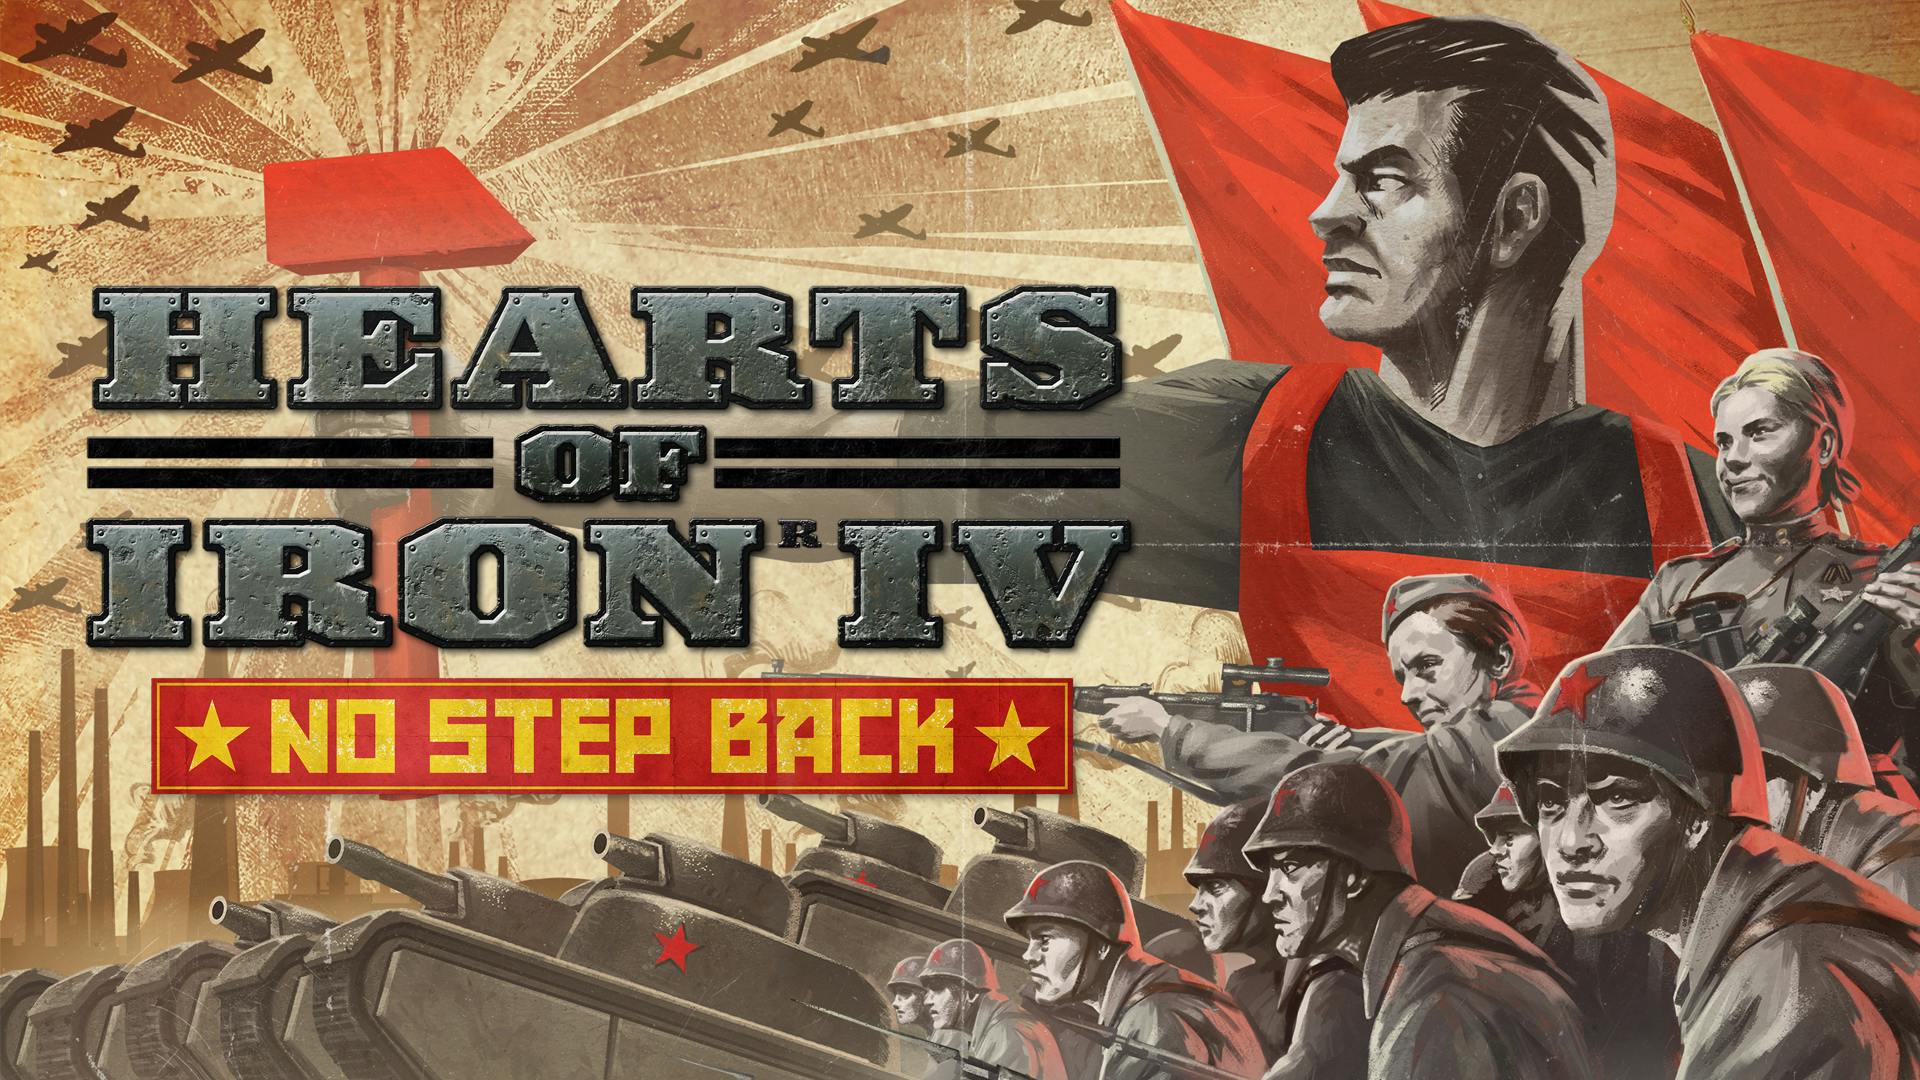 Hearts of Iron 4 no Step back. Hearts of Iron IV: no Step back. No Step back hoi 4. Hoi 4 фон. Длс для hoi 4 trial of allegiance